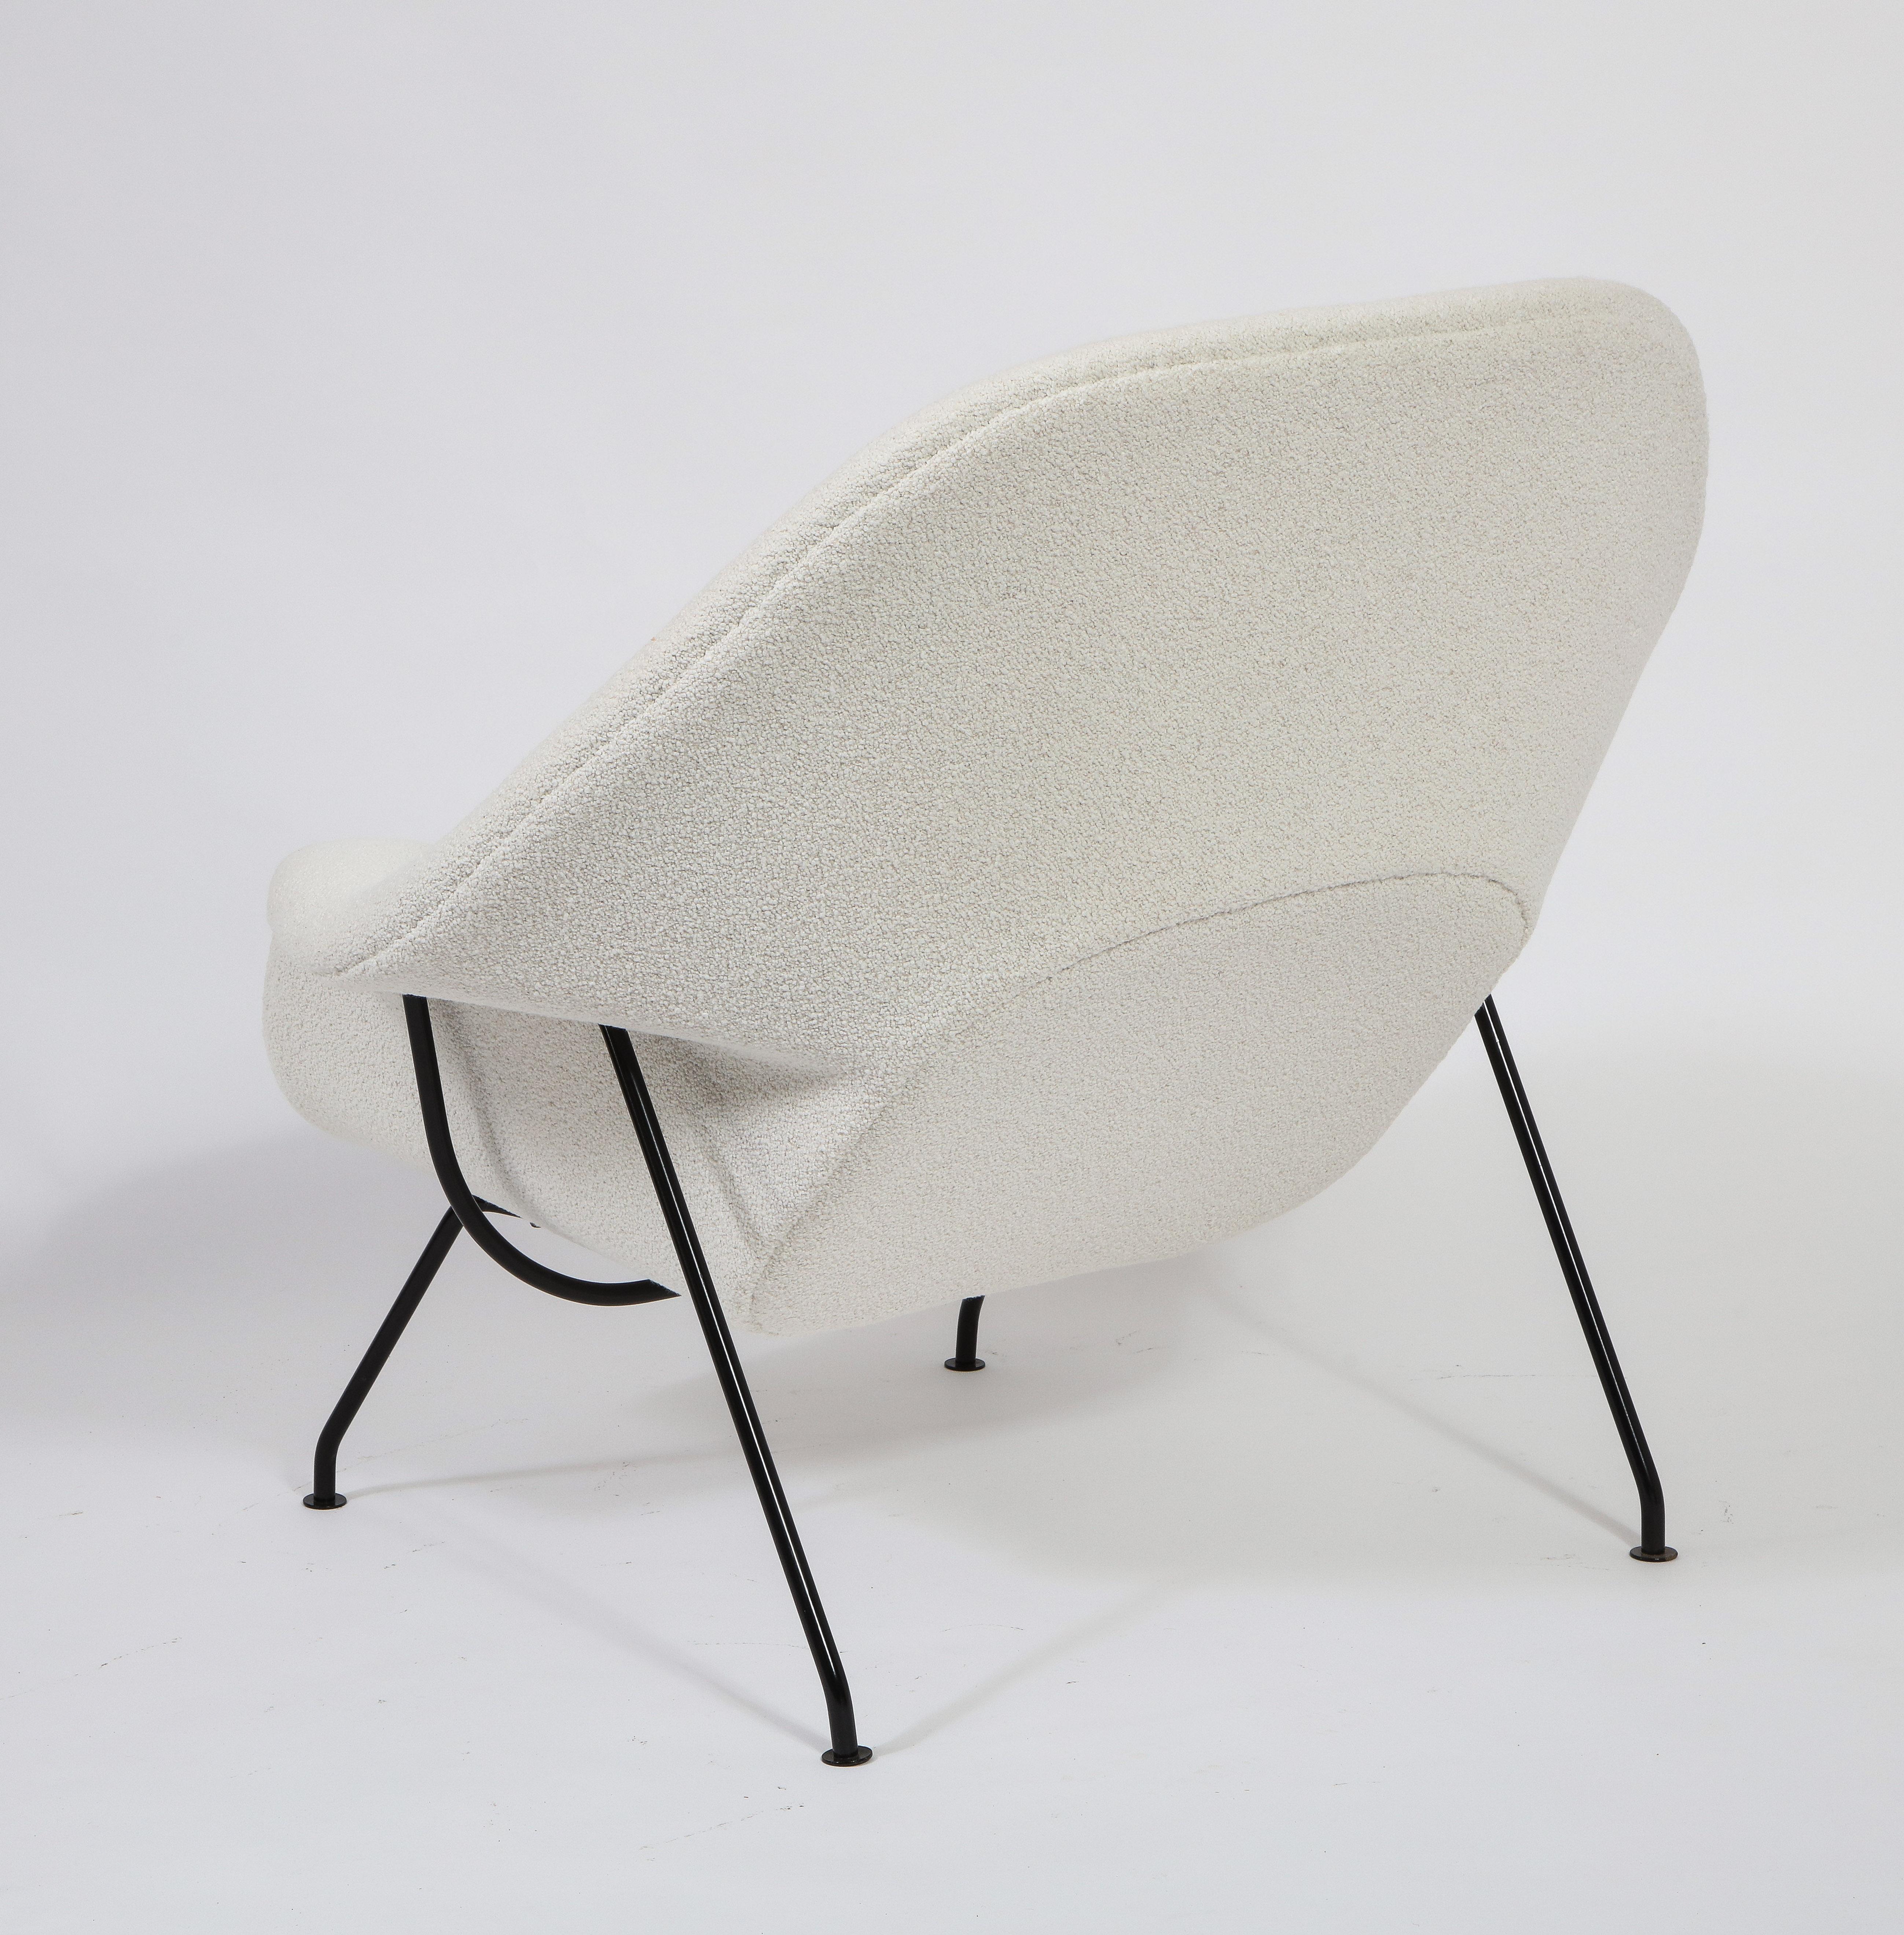 Eero Saarinen for Knoll Pair of Two-Tone Womb Chairs with Ottomans, USA 1955 For Sale 2